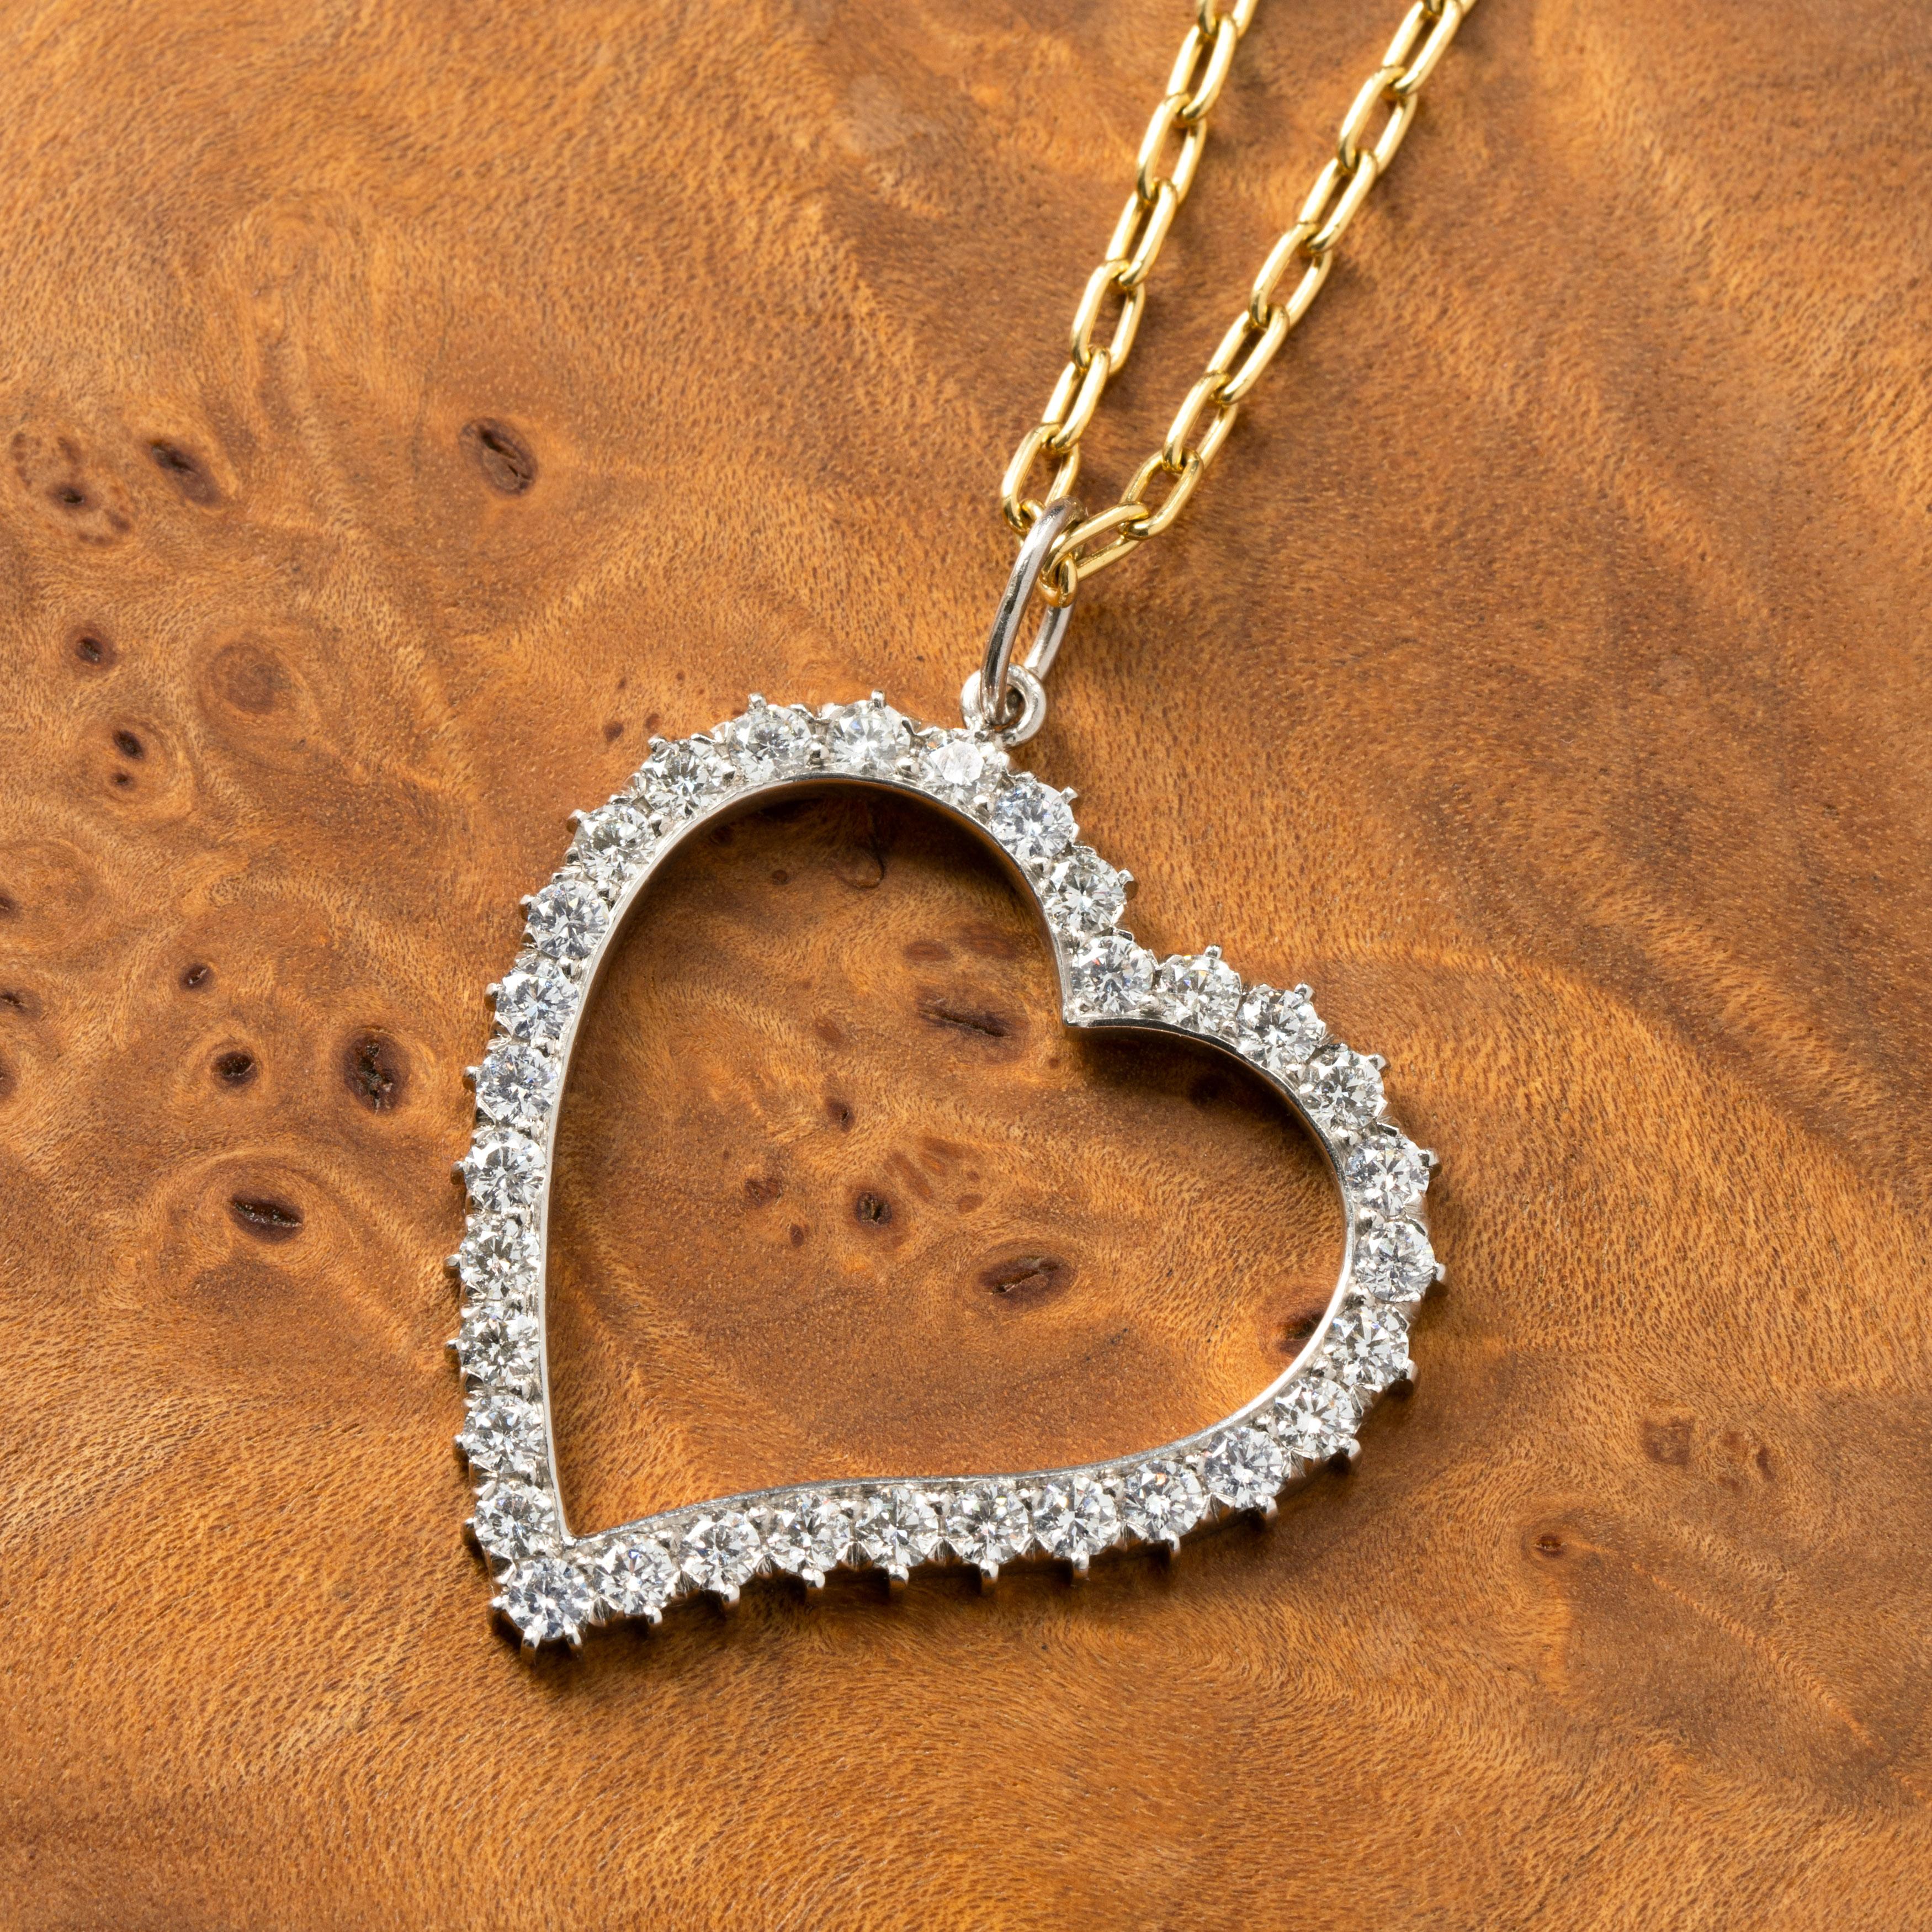 Canadamark x Stephanie Windsor Large Platinum and Diamond Open Witch's Heart Charm

Material: Solid Platinum and 2.26 carats of CanadaMark White Diamonds

H: 3.43 cm x W 3.3 cm / H: 1.35 in. x W: 1.3 in.
8.25 grams

Condition: New, beautiful